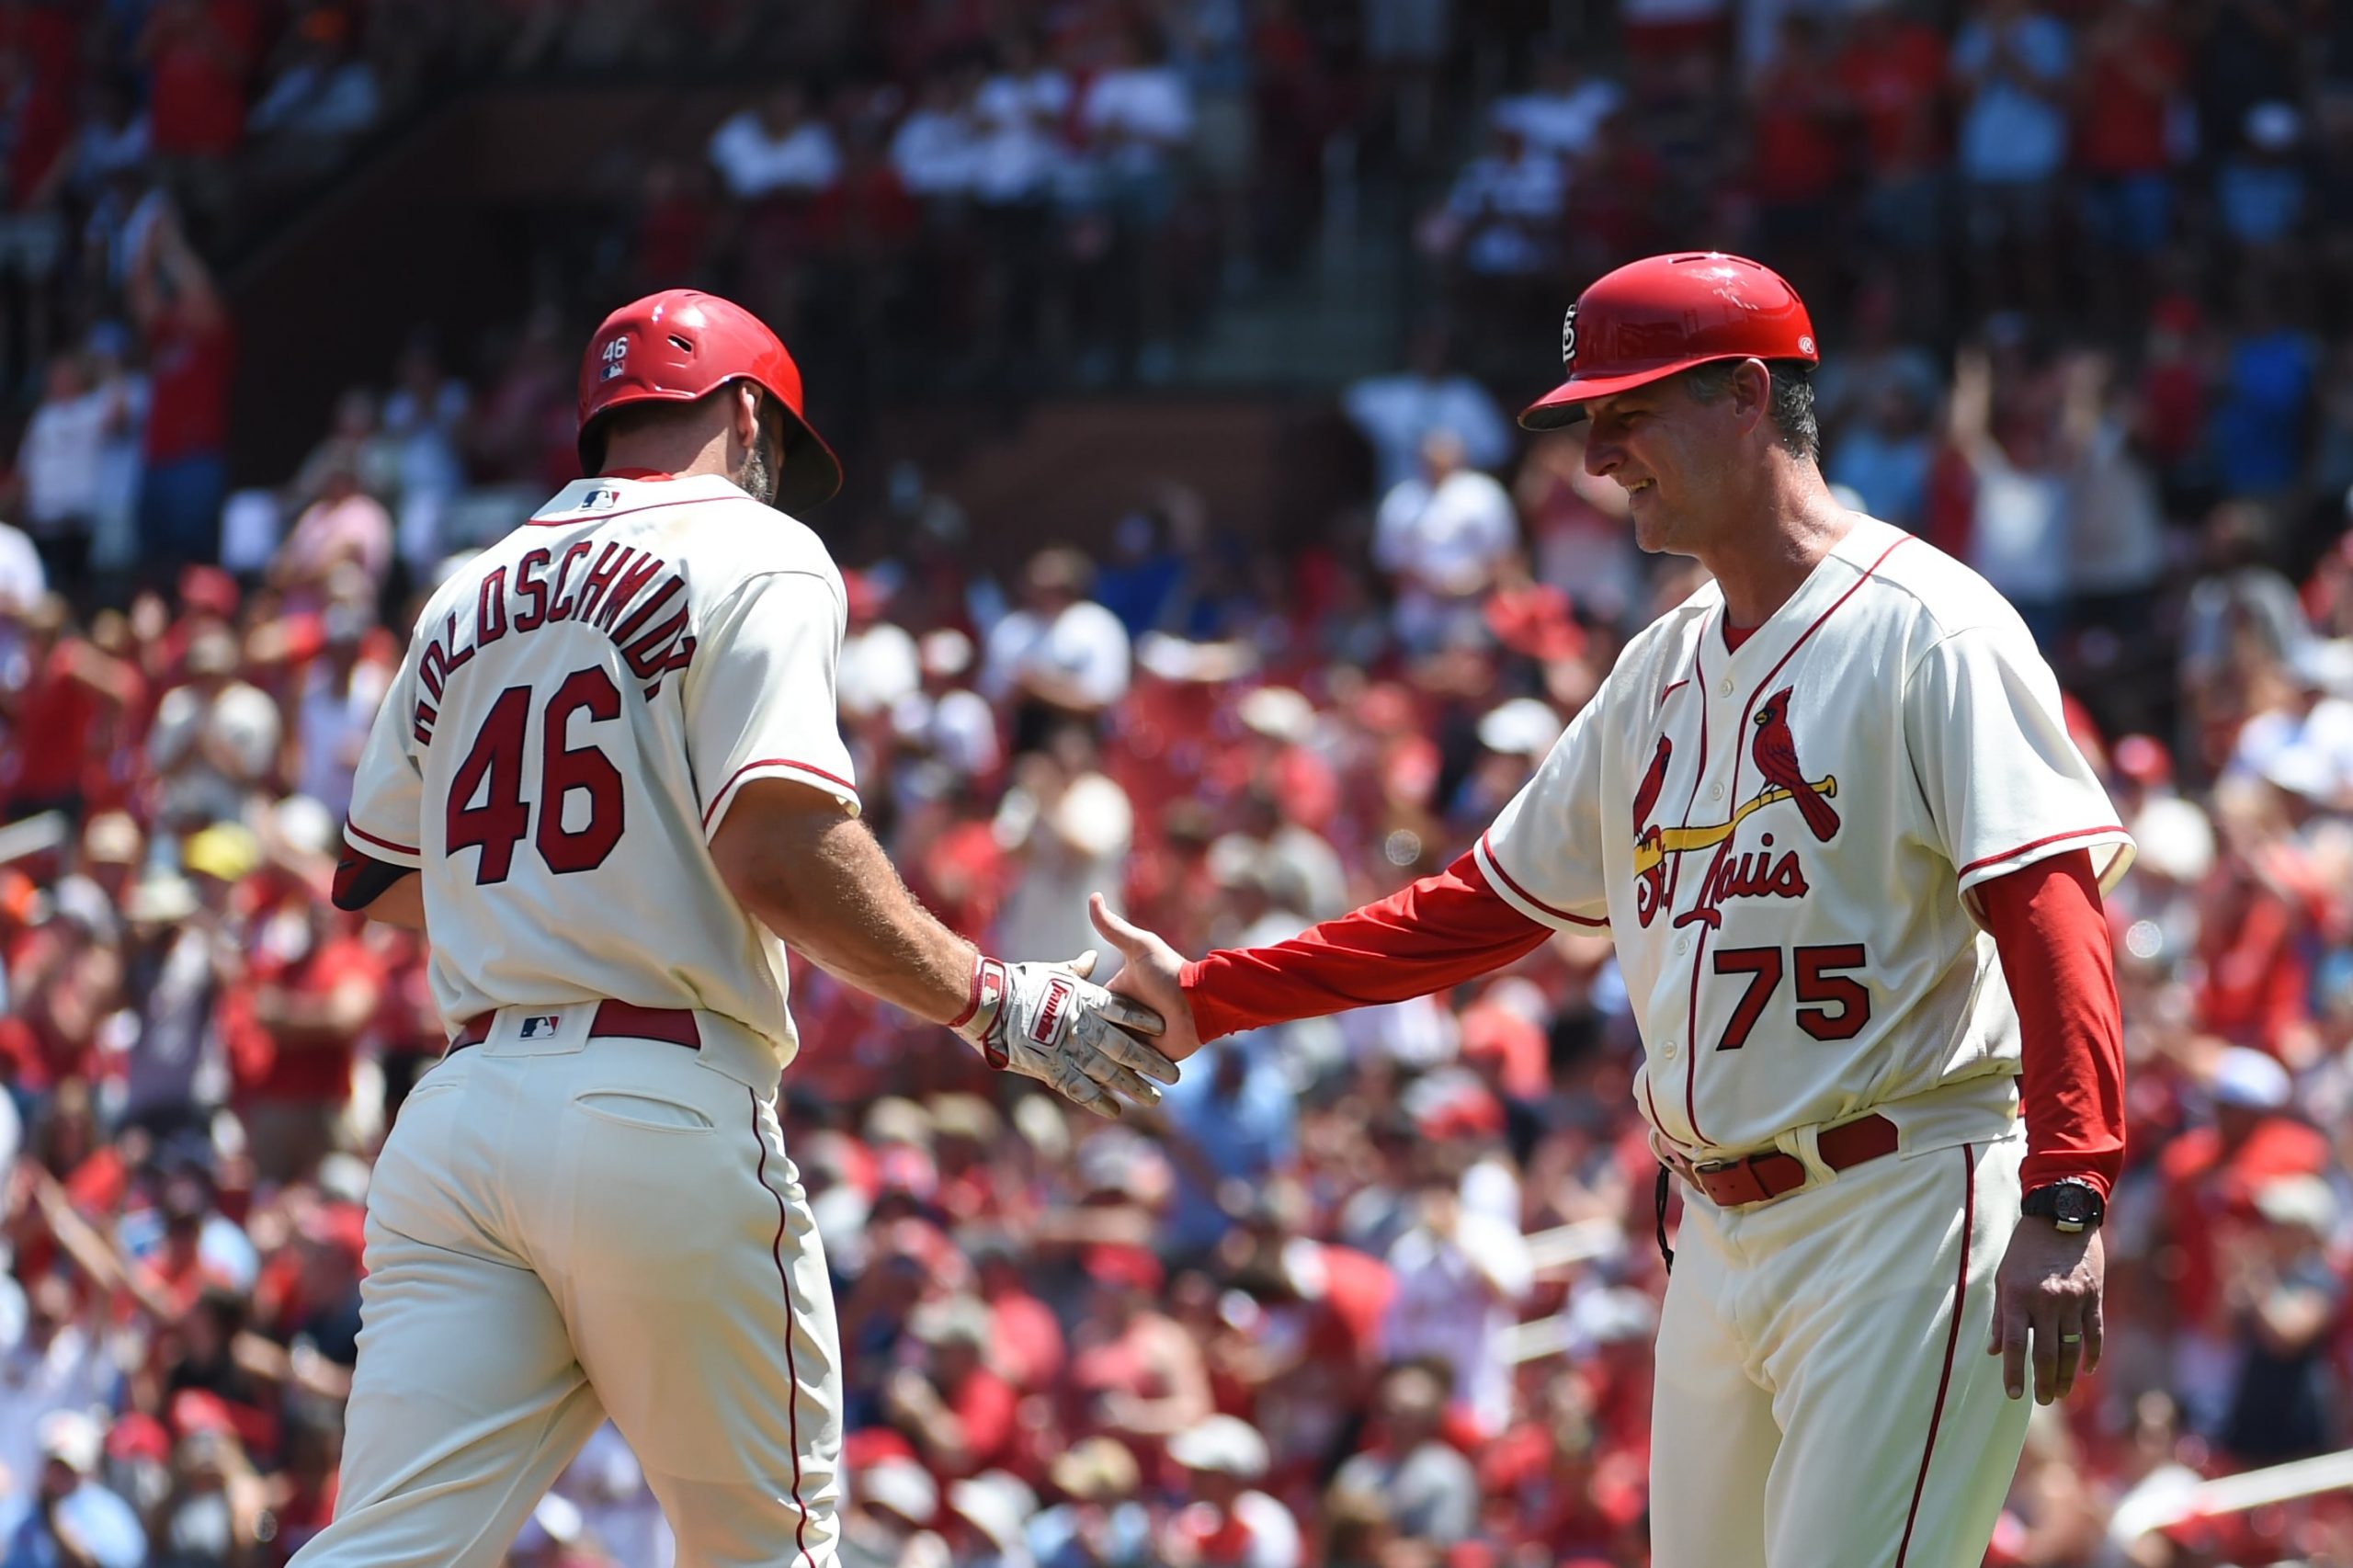 MLB Tuesday mega parlay 8/2 (+938 odds): Cardinals to cash in